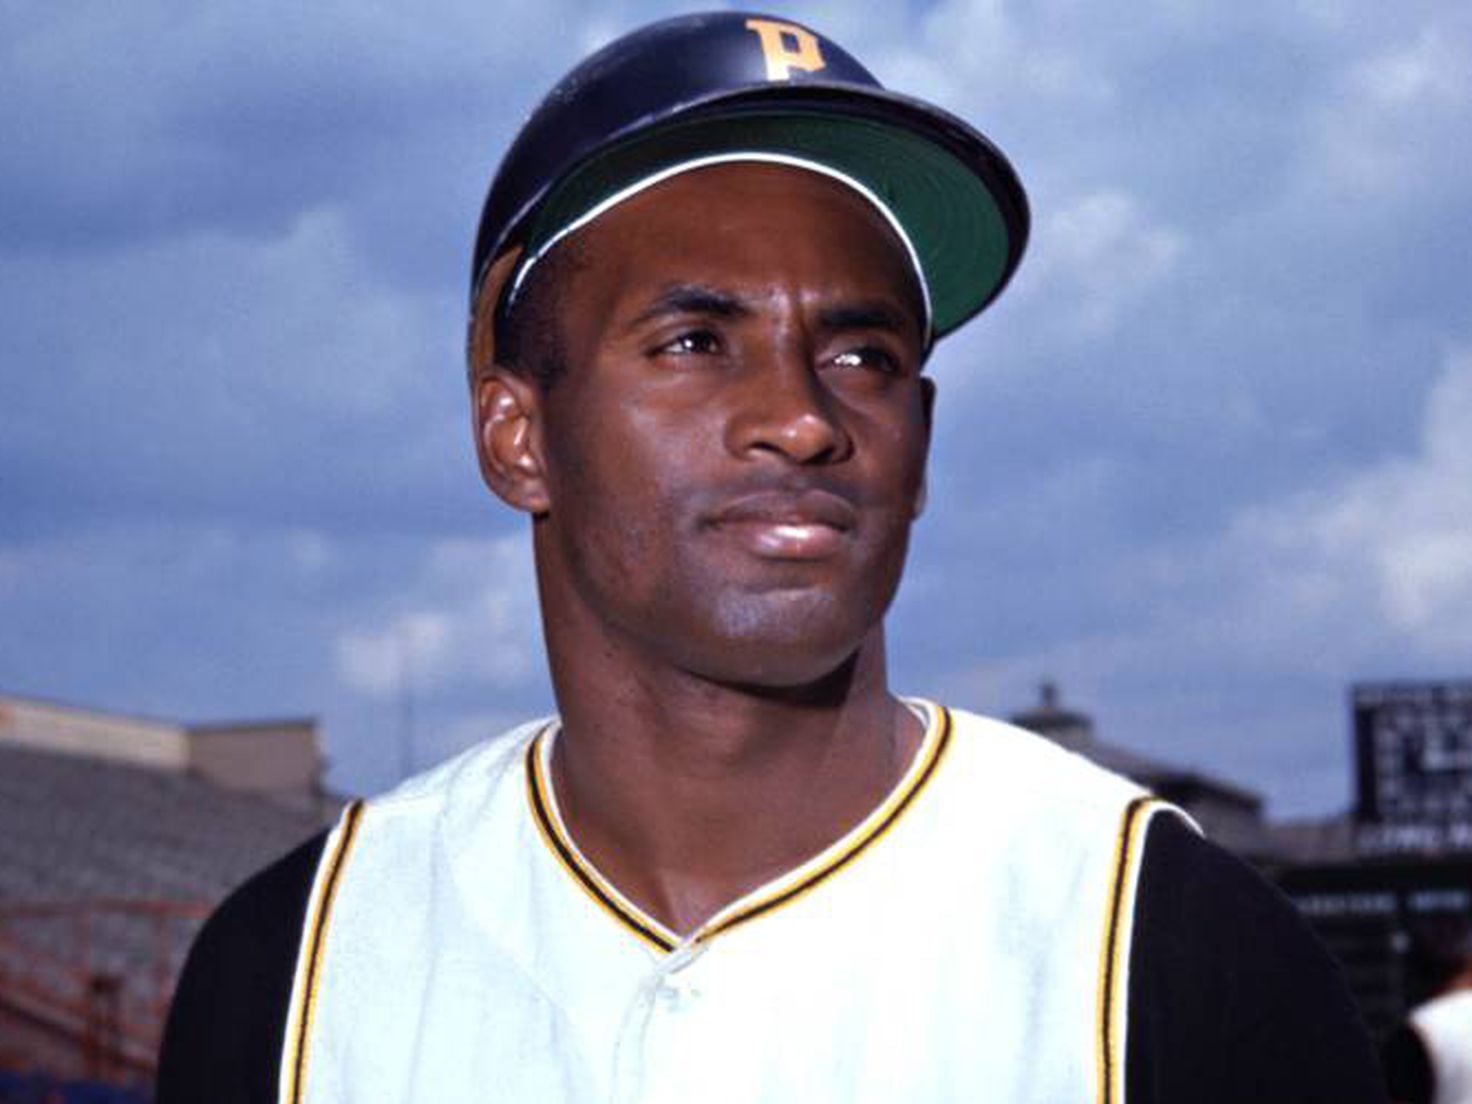 Roberto Clemente- for Hispanic Heritage Month for Kids 